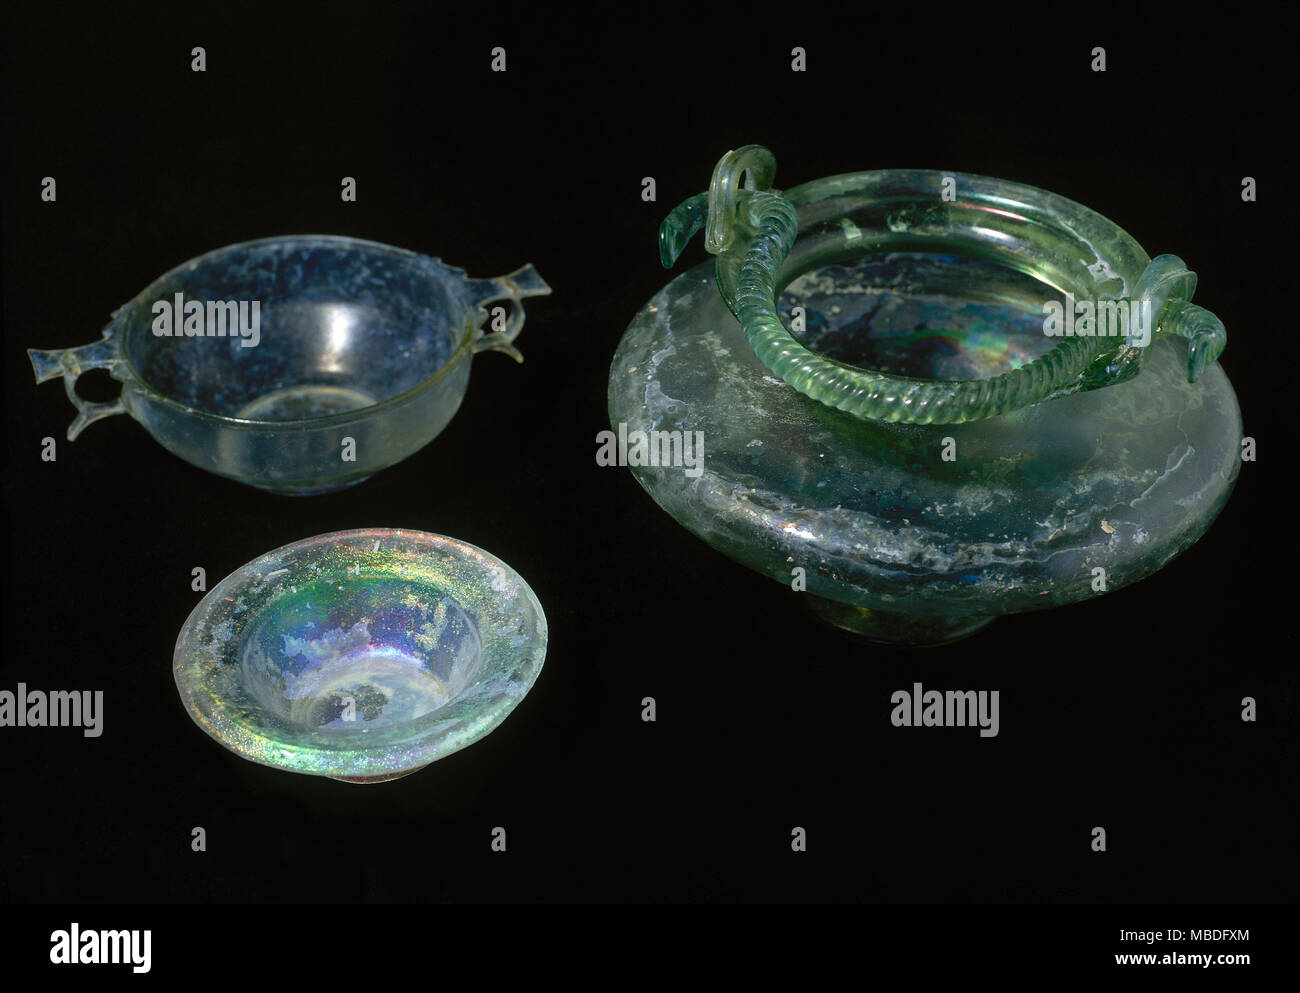 Roman glass set, 1st century AD. From left to right: plate, drinking cup (scyphos) and biconical bowl with twisted handle. National Museum of Roman Art. Merida, province of Badajoz, Extremadura, Spain. Stock Photo